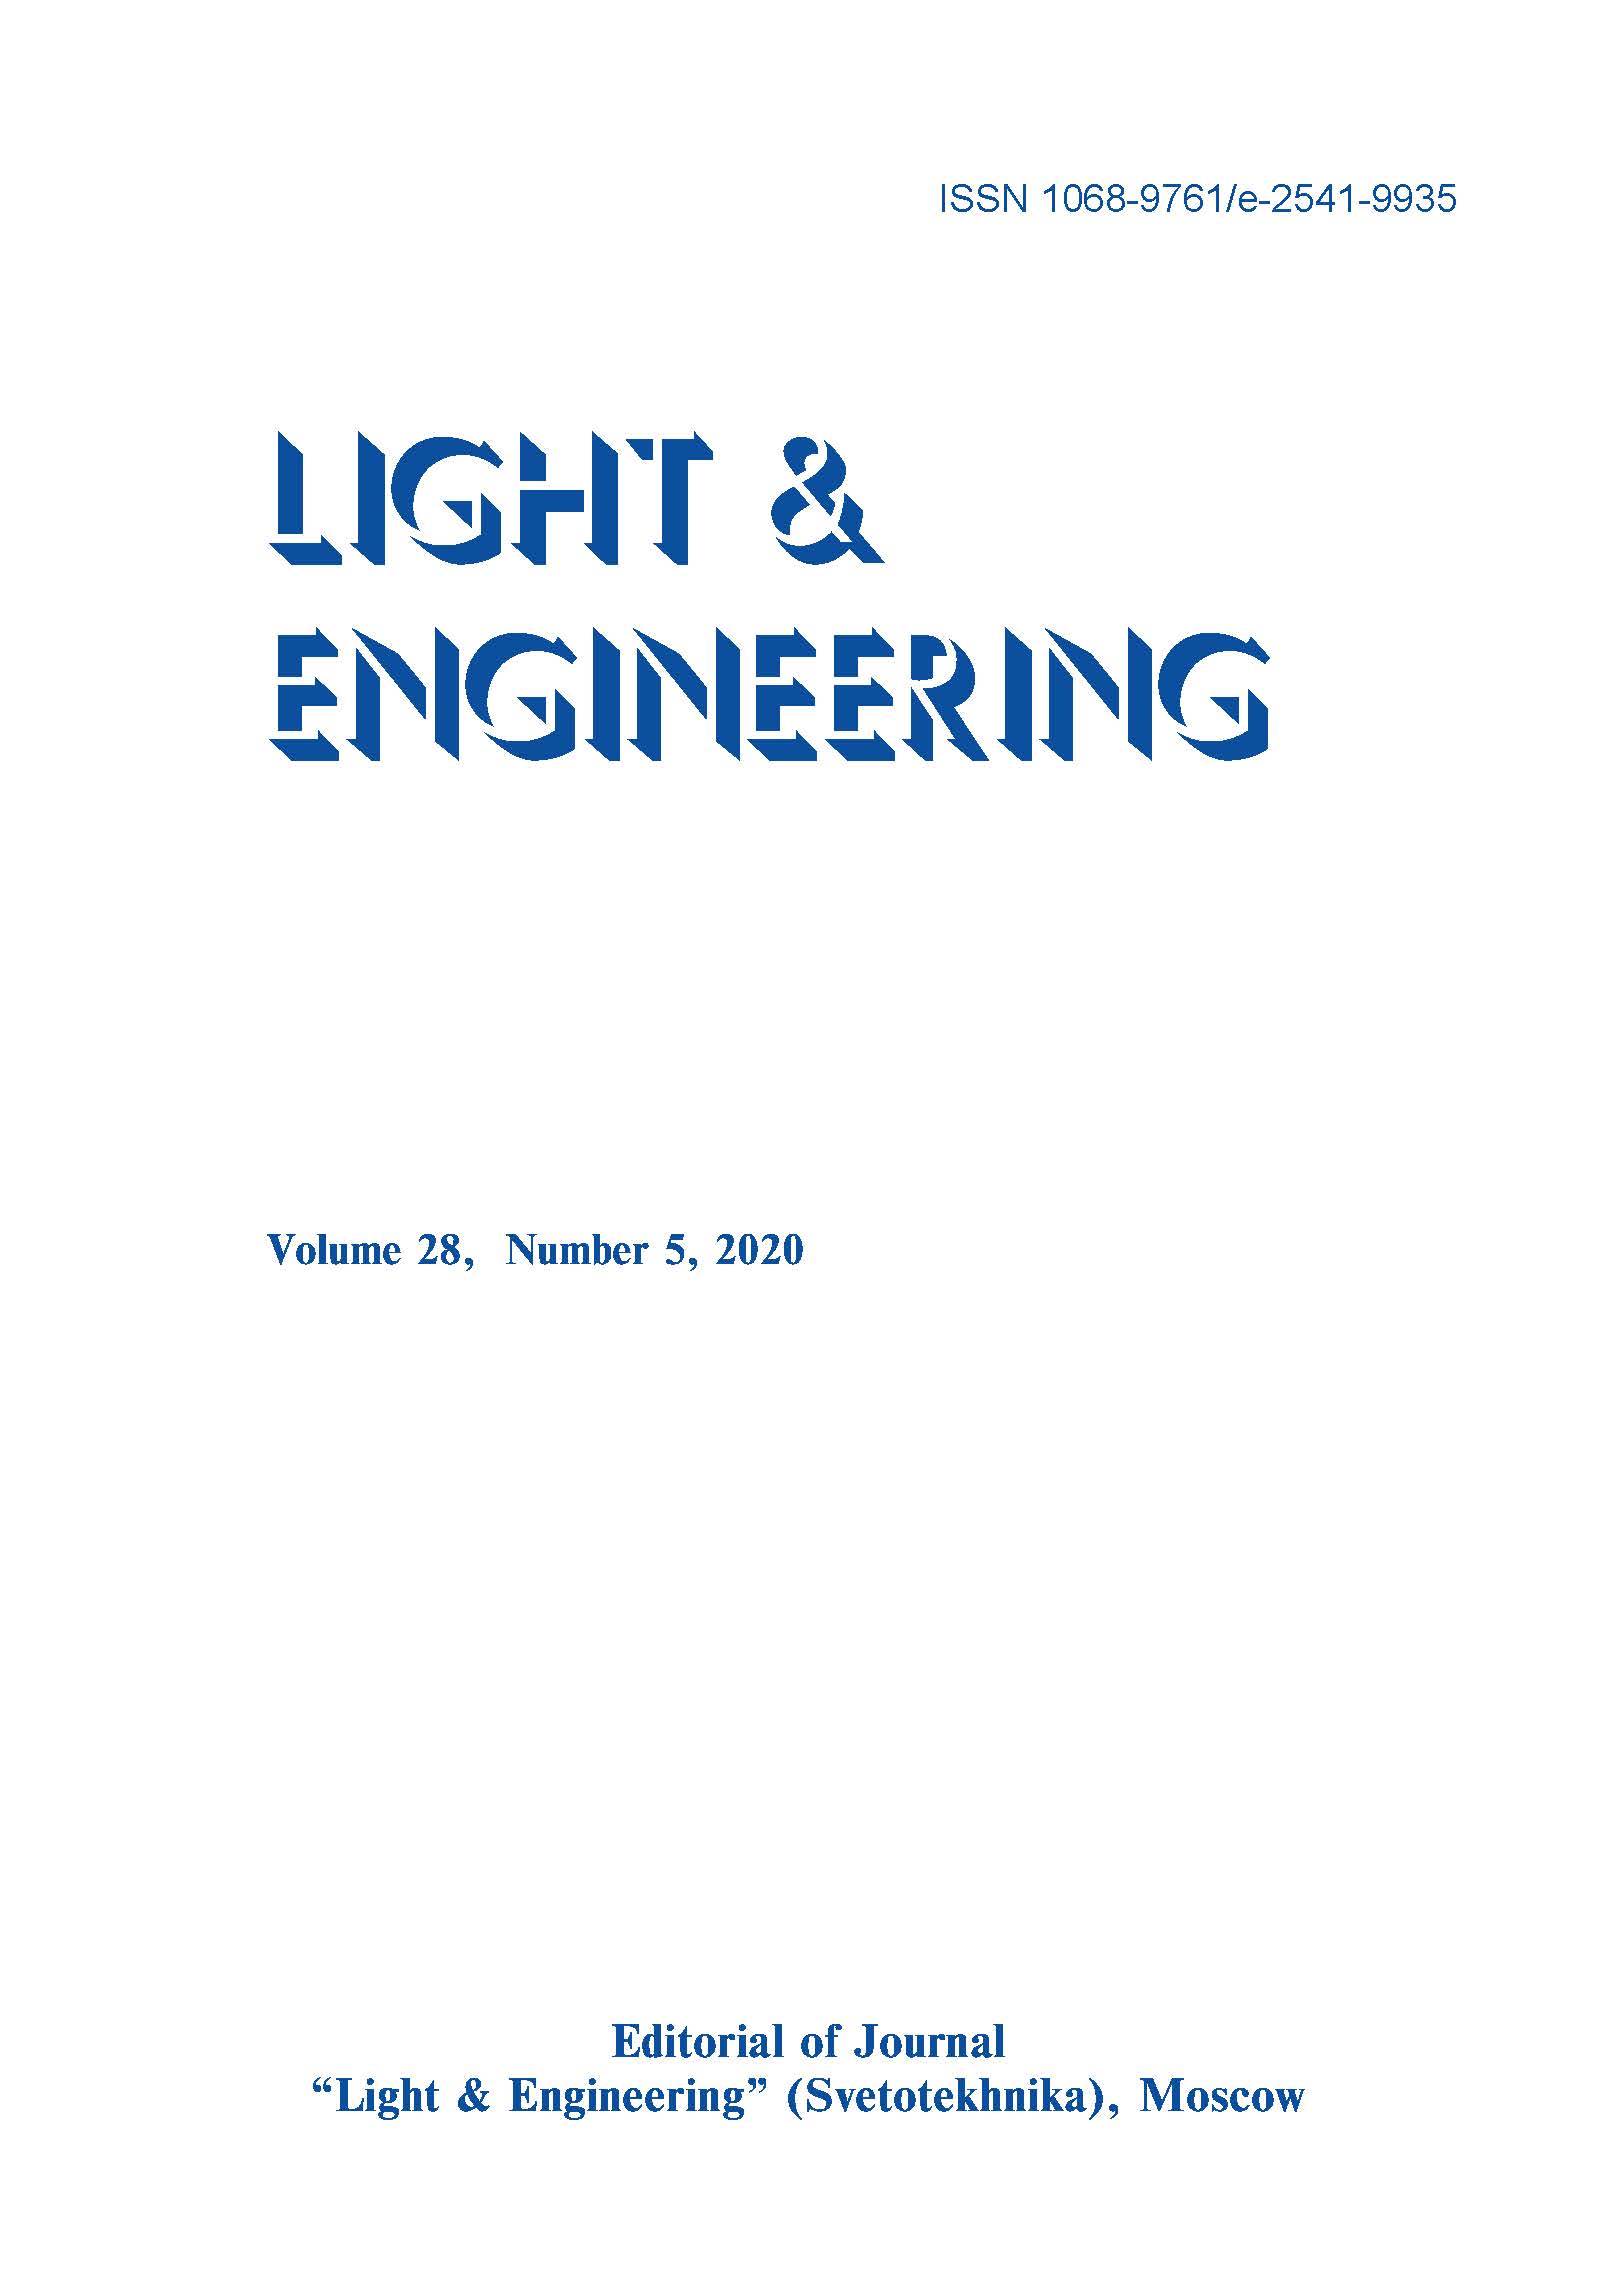 Analysis On Thermal Behaviour Of The Sink And Die Area With Different Thermal Interface Material For High Power Light Emitting Diodes Light & Engineering Vol. 28, No. 5